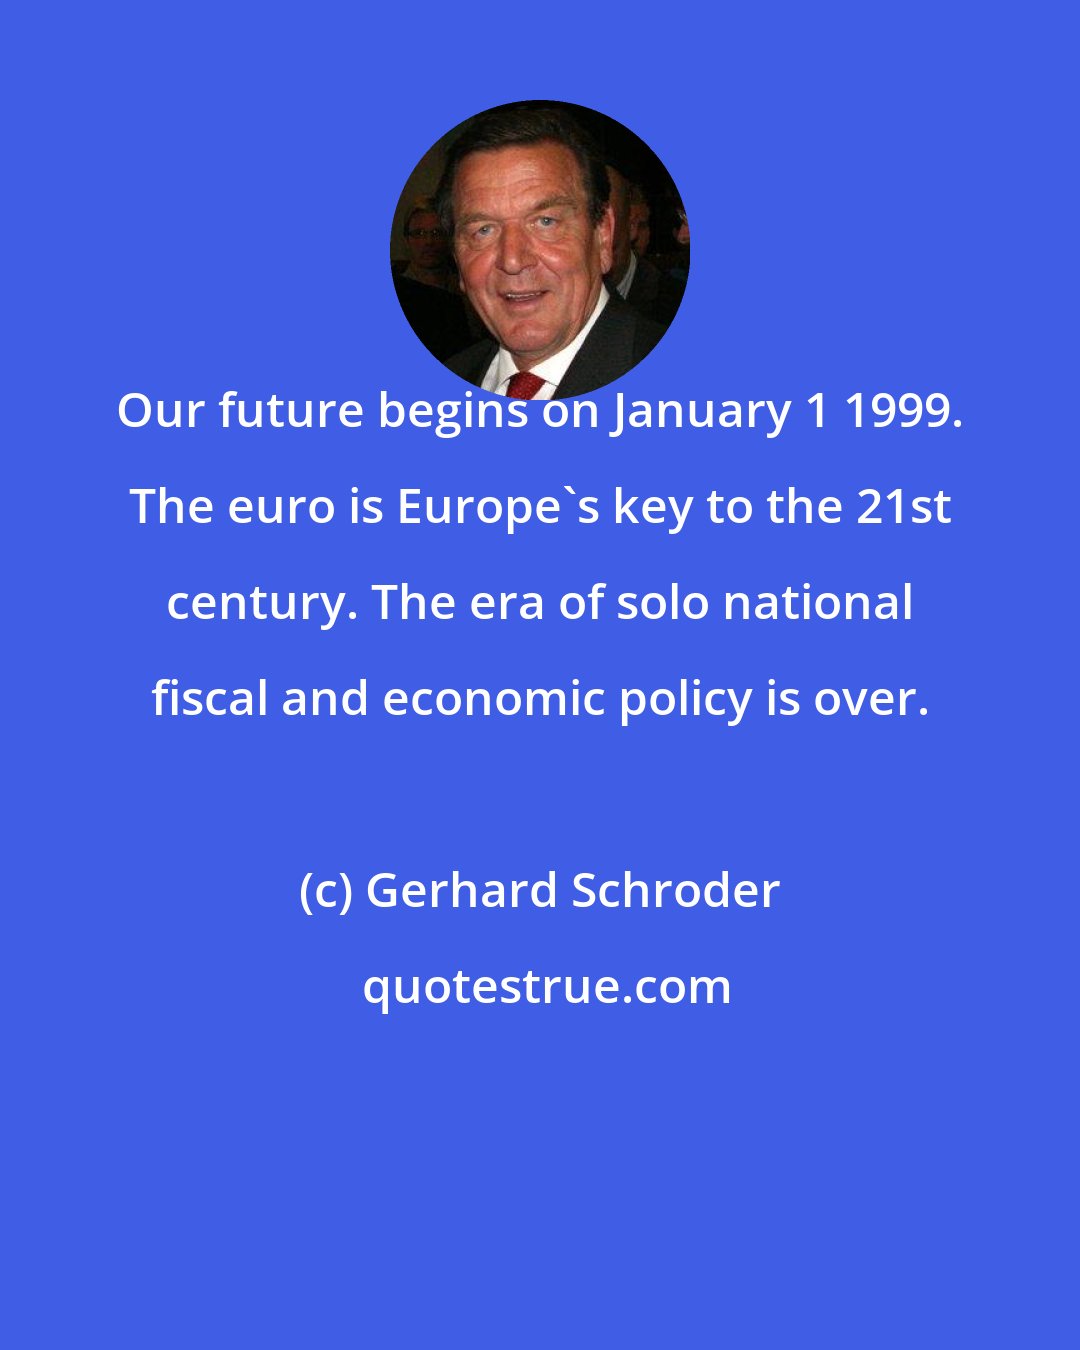 Gerhard Schroder: Our future begins on January 1 1999. The euro is Europe's key to the 21st century. The era of solo national fiscal and economic policy is over.